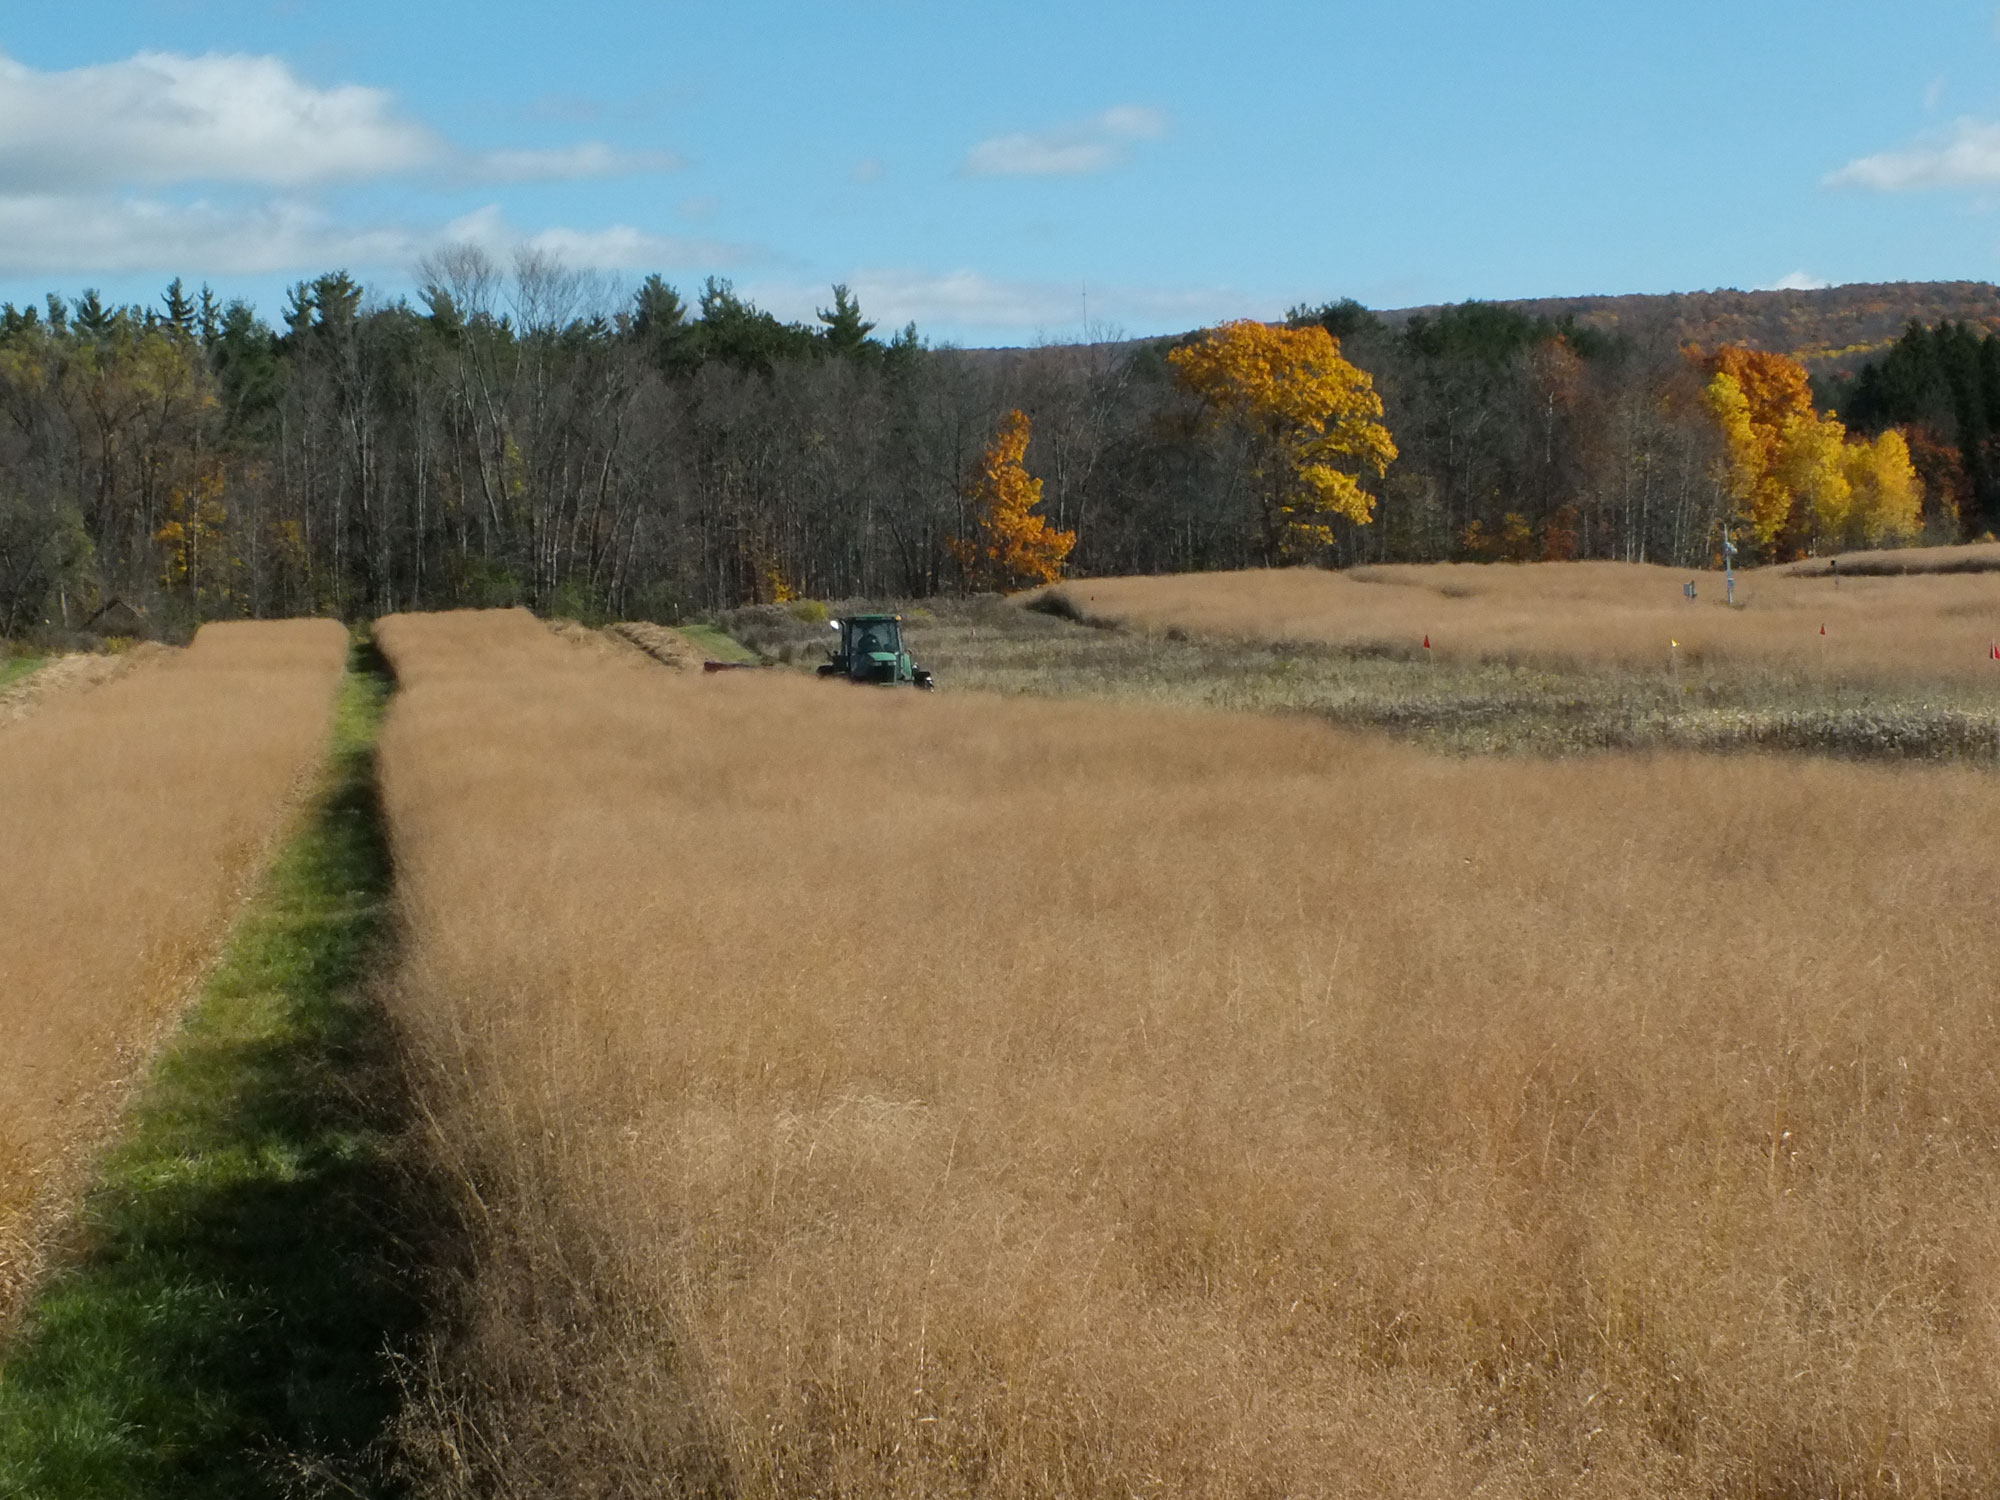 Photograph of a tractor moving switchgrass in a field tended by Cornell University in Ithaca, New York.